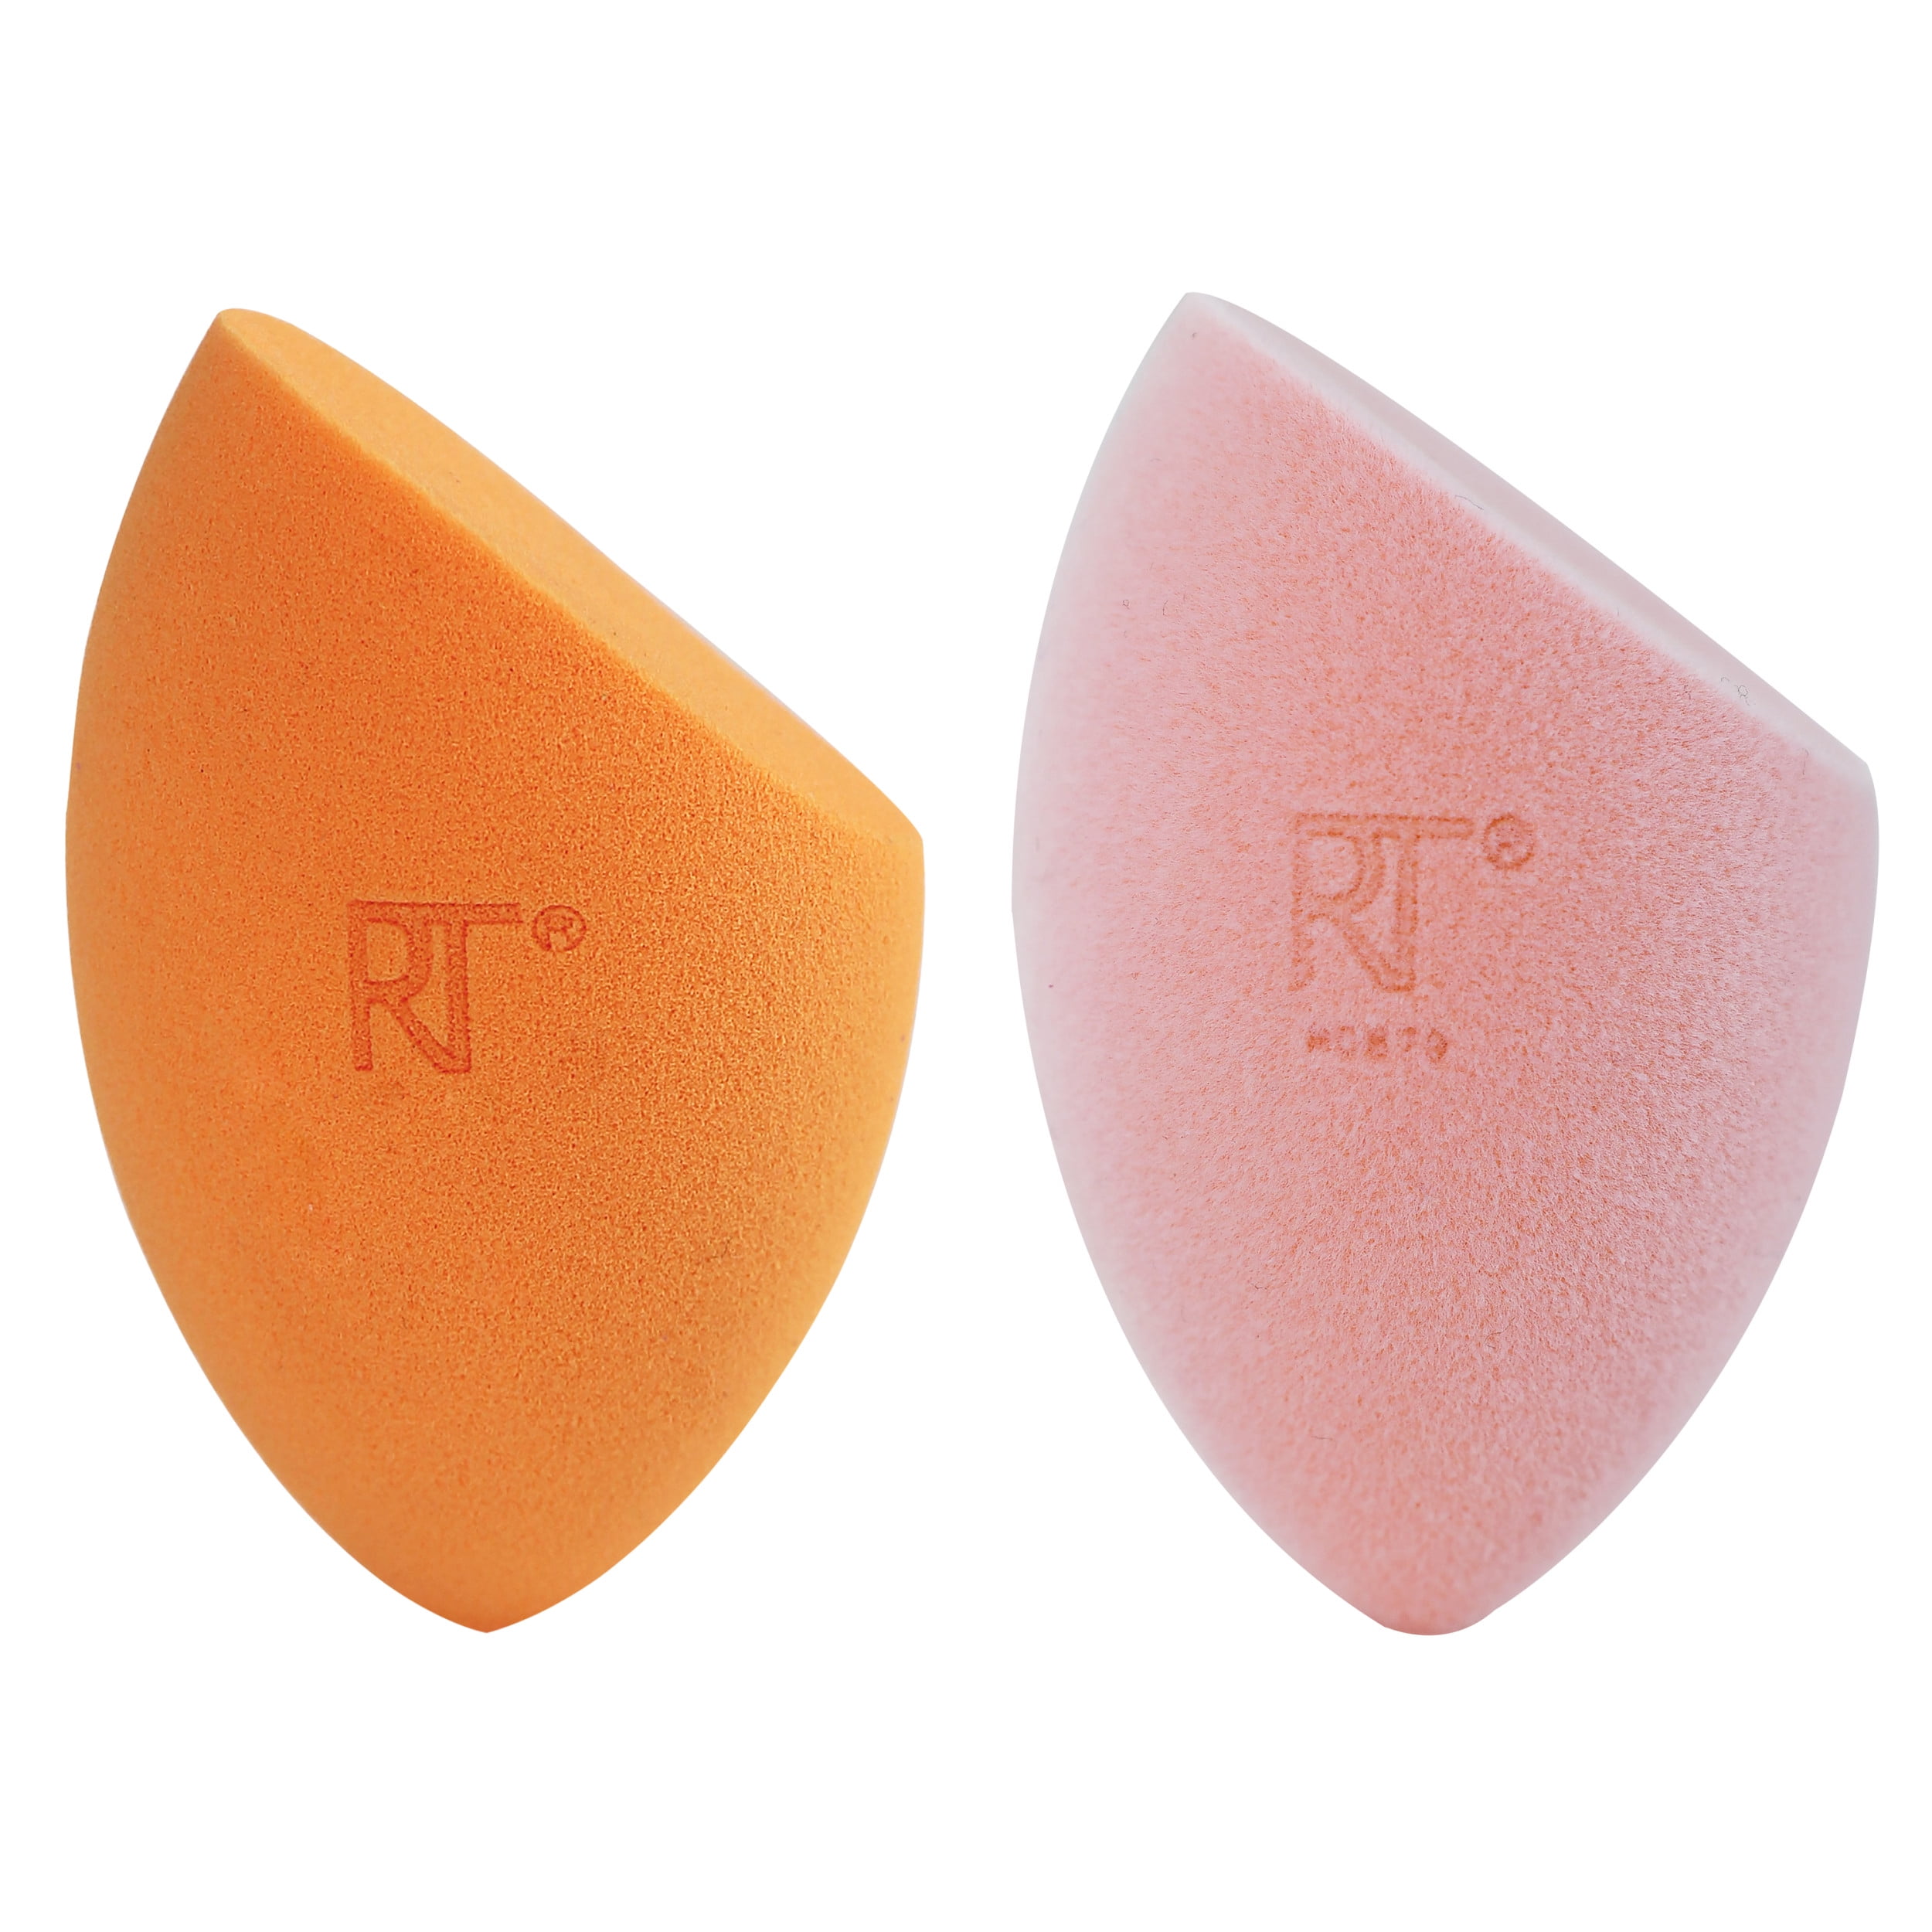 Real Techniques Miracle Complexion Sponge & Miracle Powder Sponge Duo, 2 Count